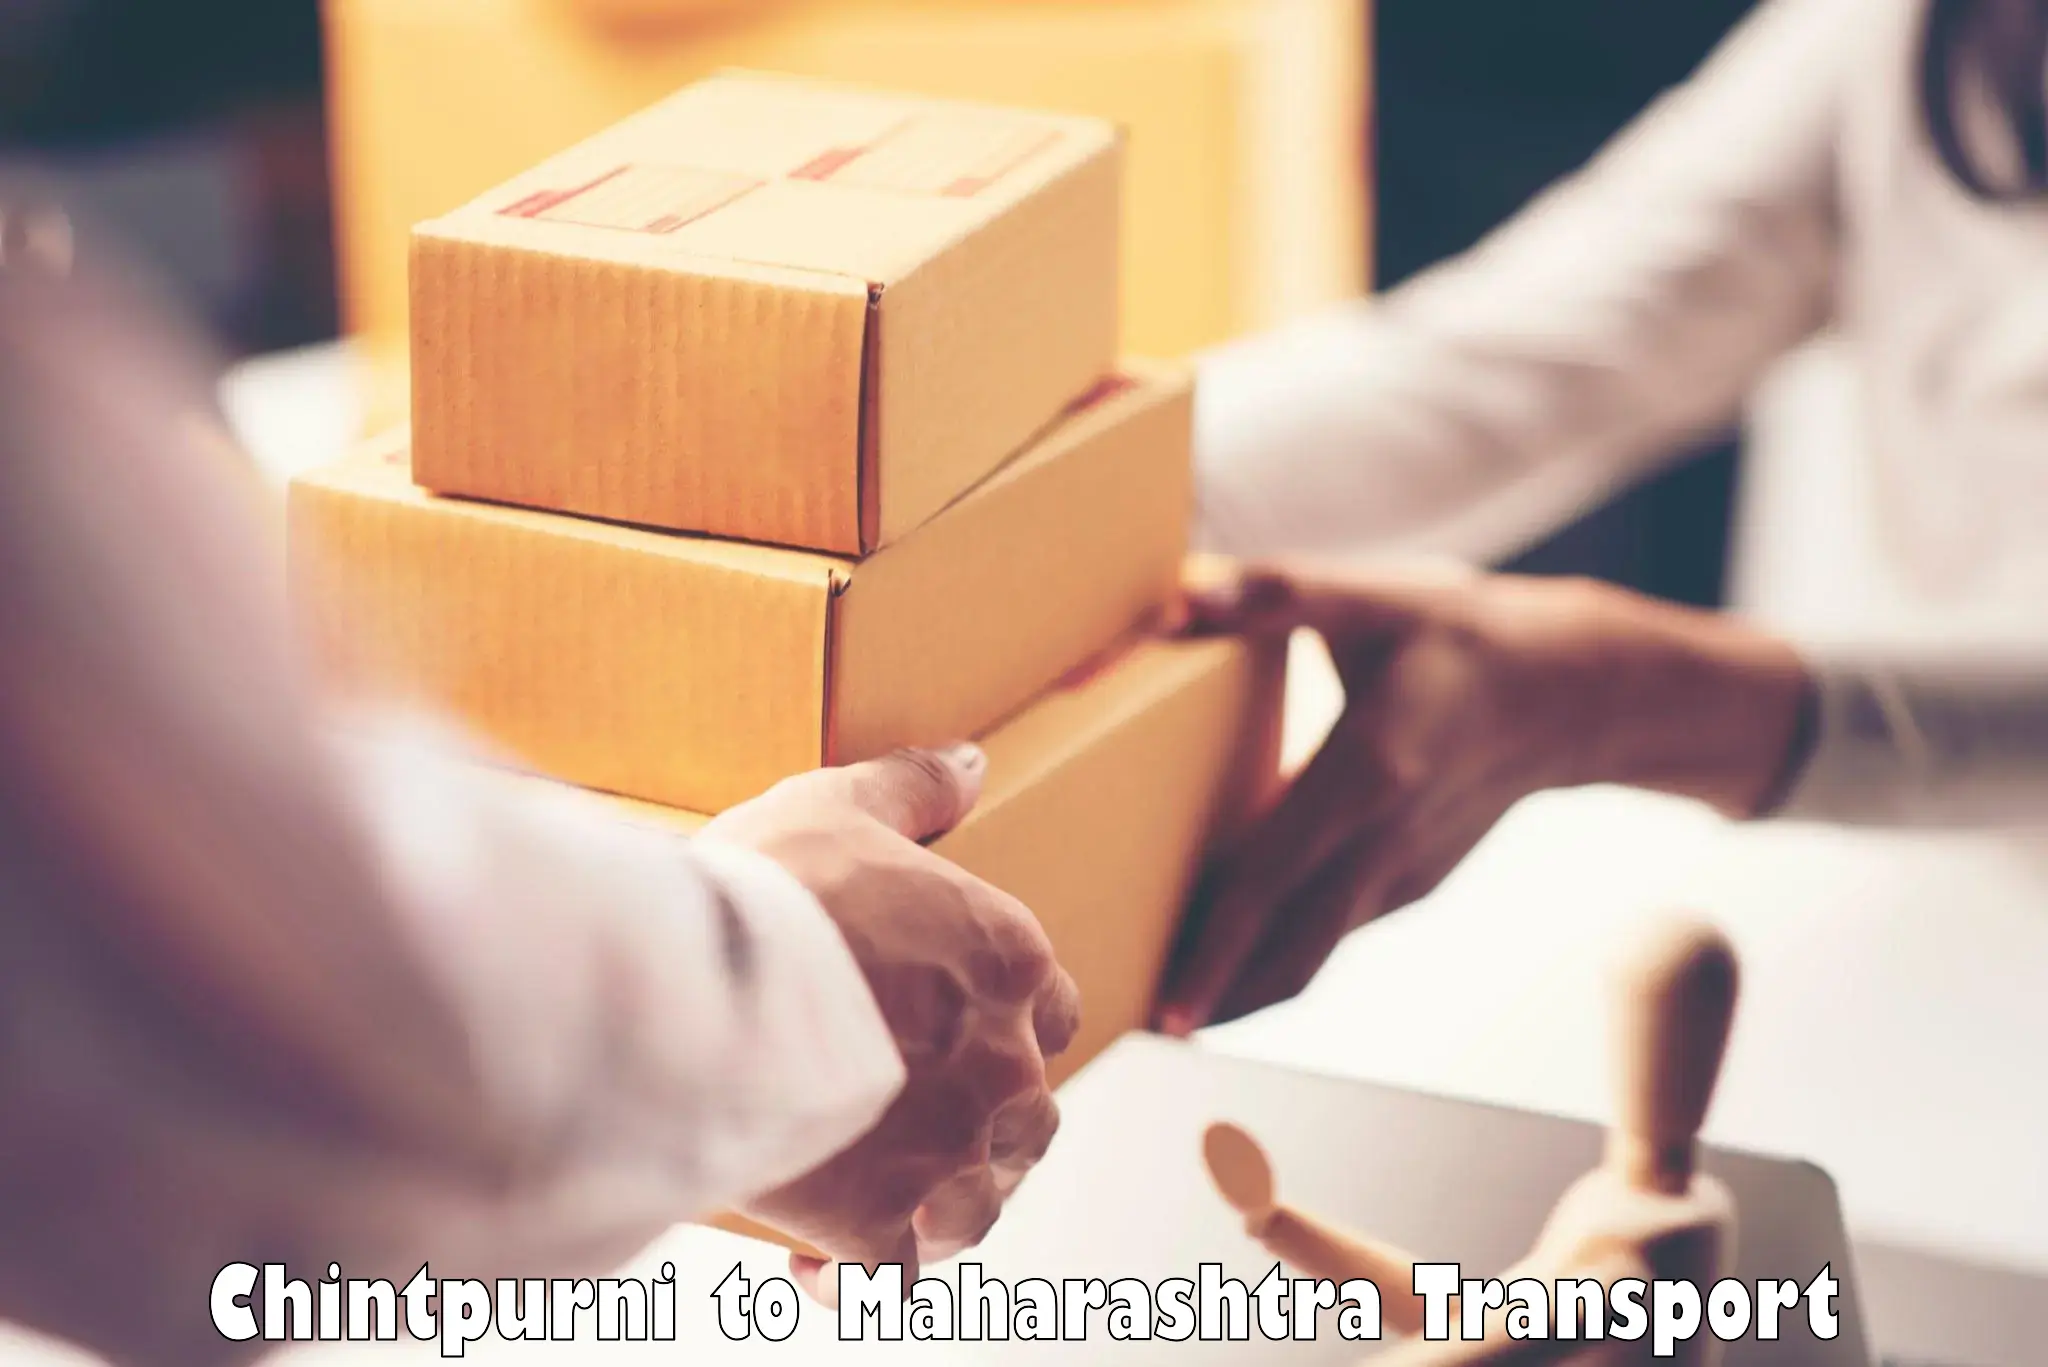 Container transportation services Chintpurni to Kolhapur